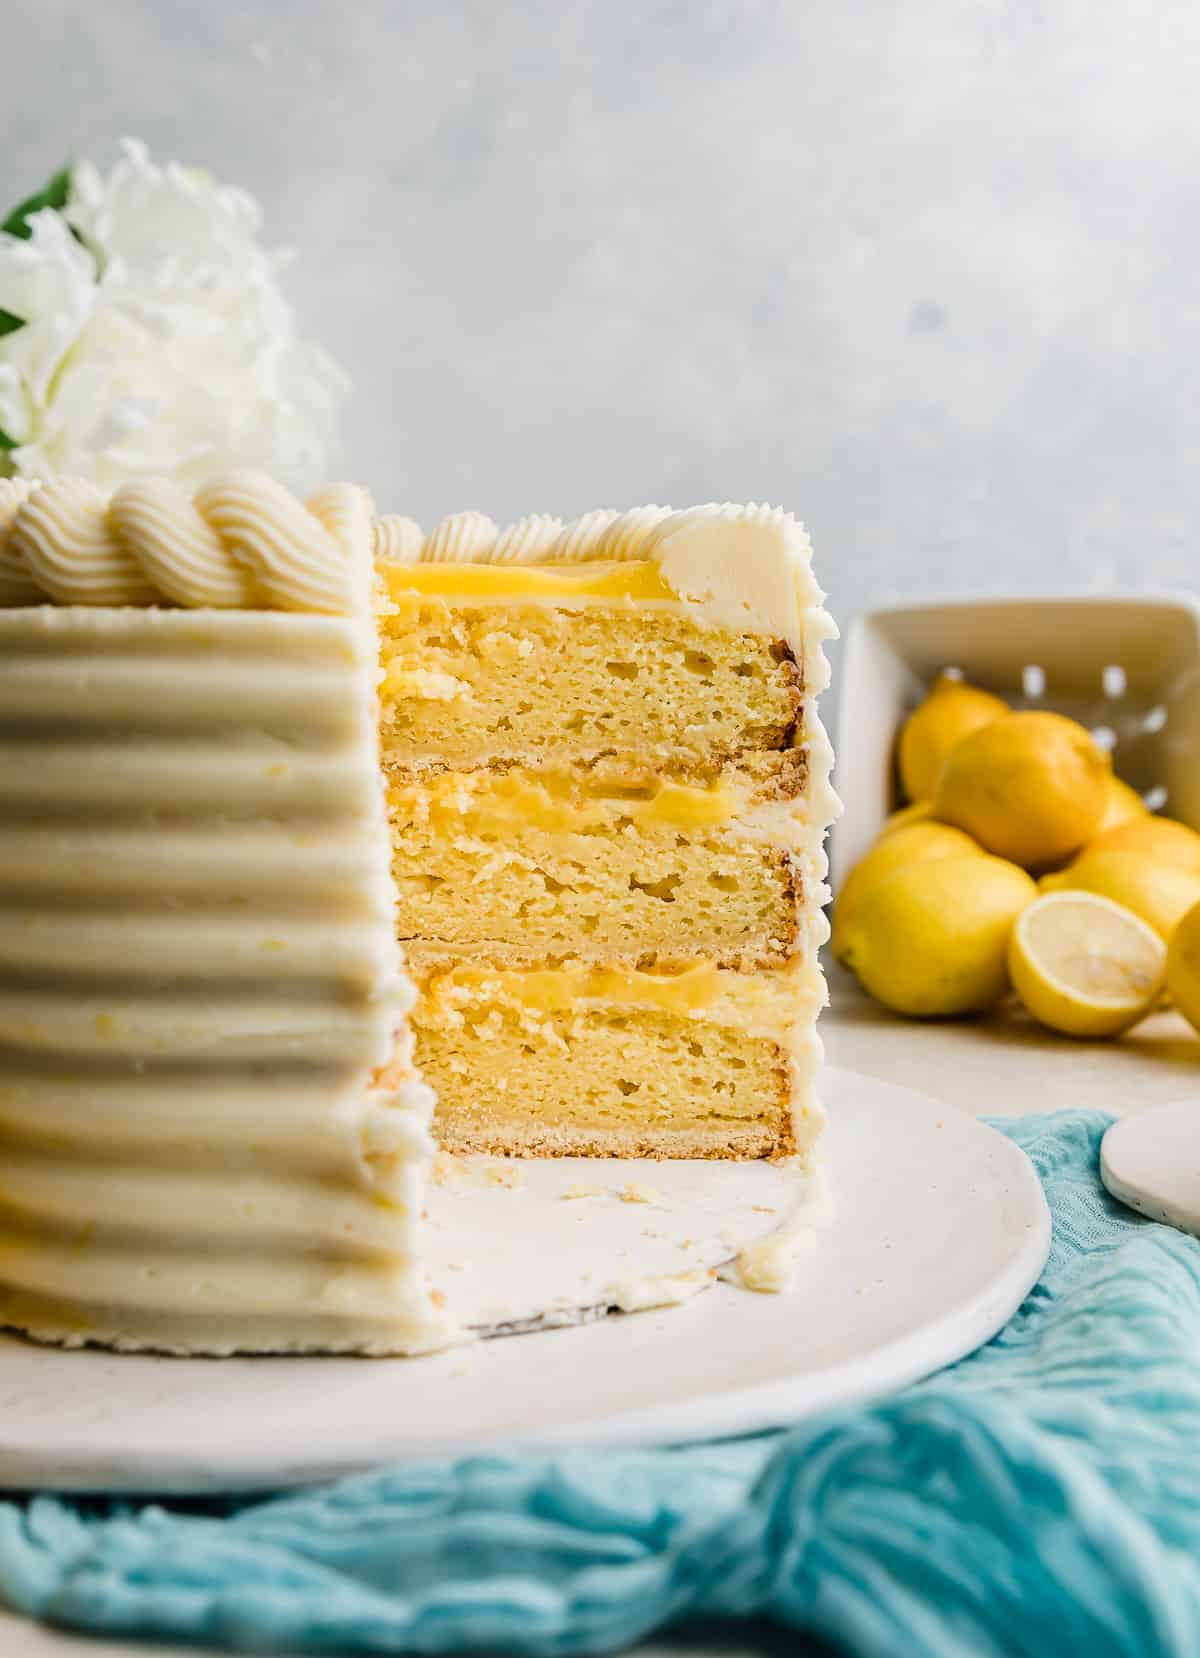 A Lemon Bar Cake cut into showing the layers: shortbread crust, lemon cake, lemon curd, and lemon frosting.